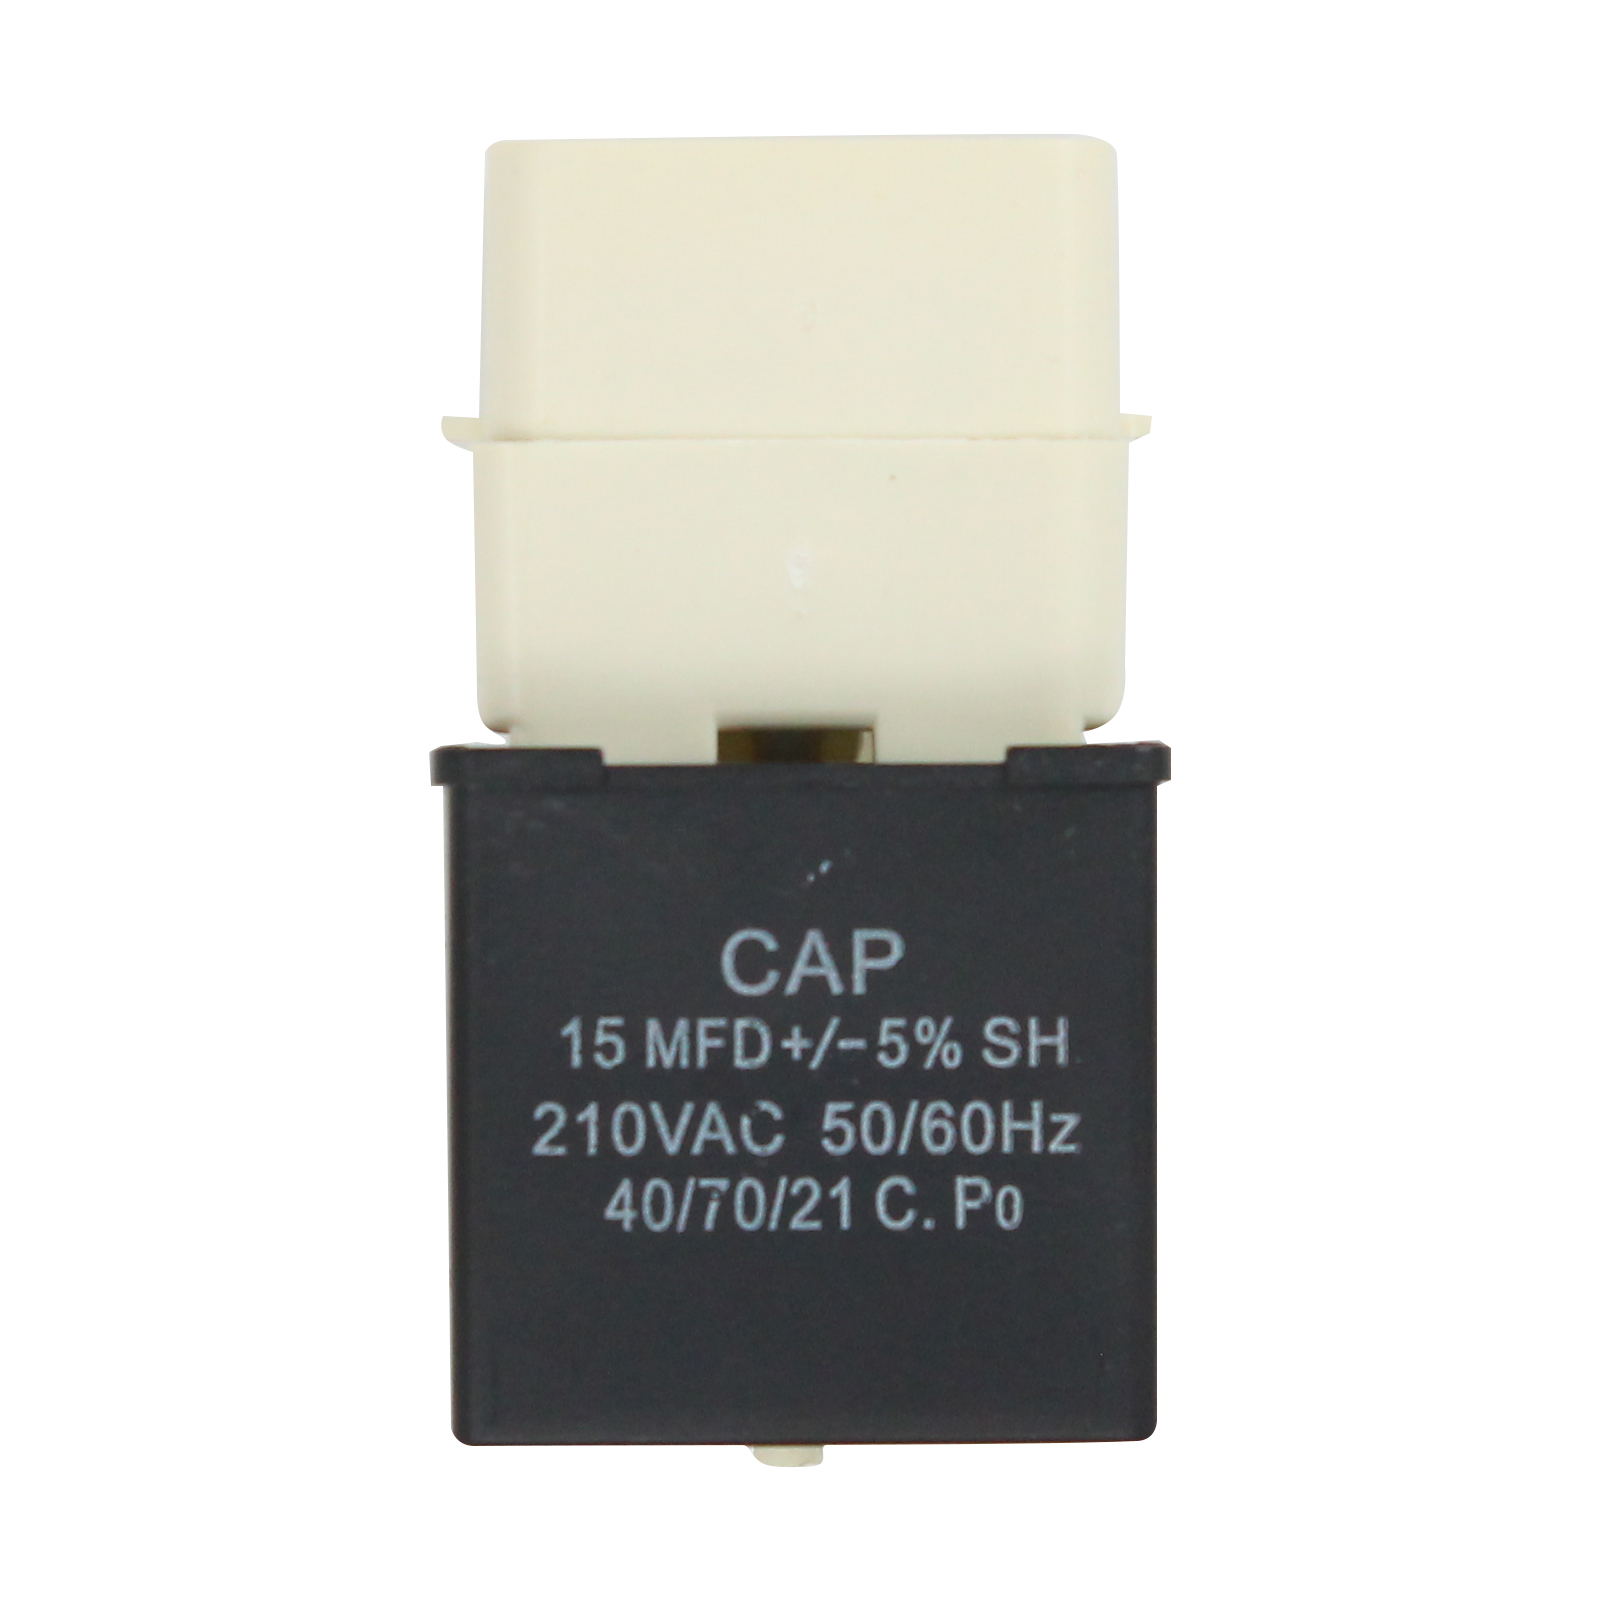 W10613606 Refrigerator Compressor Start Relay & Capacitor Replacement for Amana SRD22TPW (P1190307W W) Refrigerator - Compatible with W10613606 Start Device Relay Overload With Capacitor - image 2 of 4